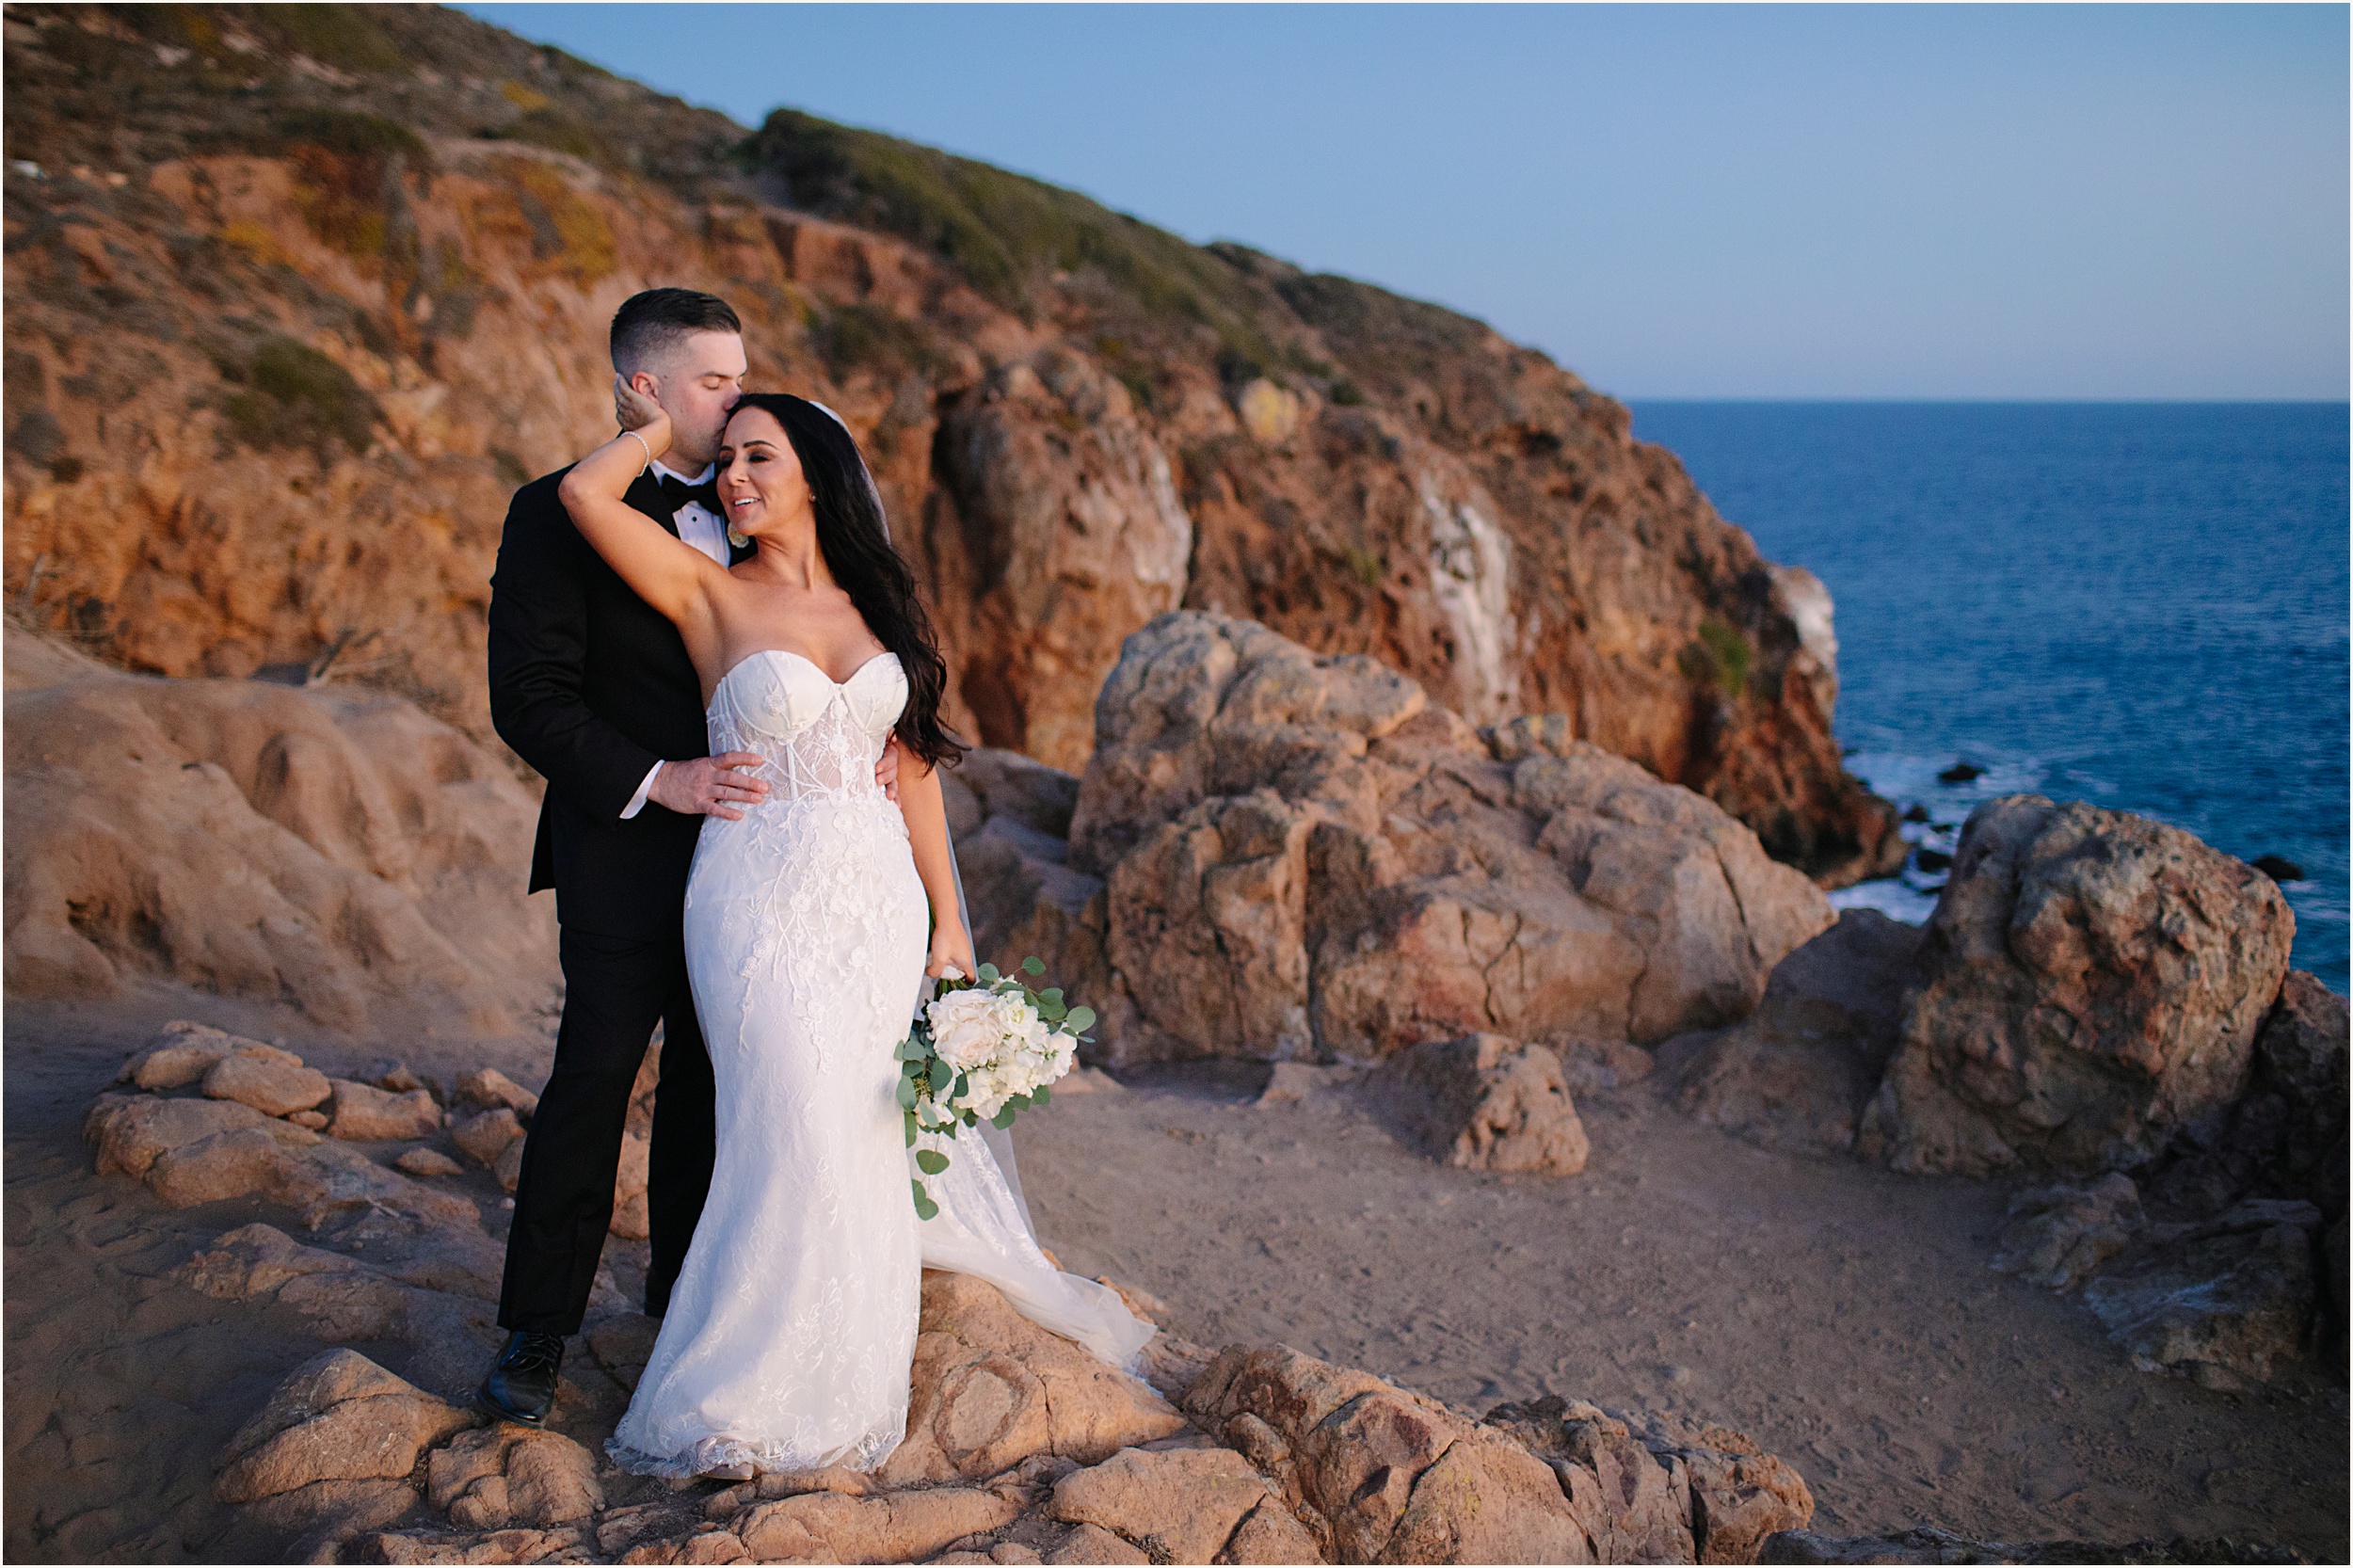 Photo of bride and groom embracing one another on cliffside view during sunset during their Malibu beach elopement